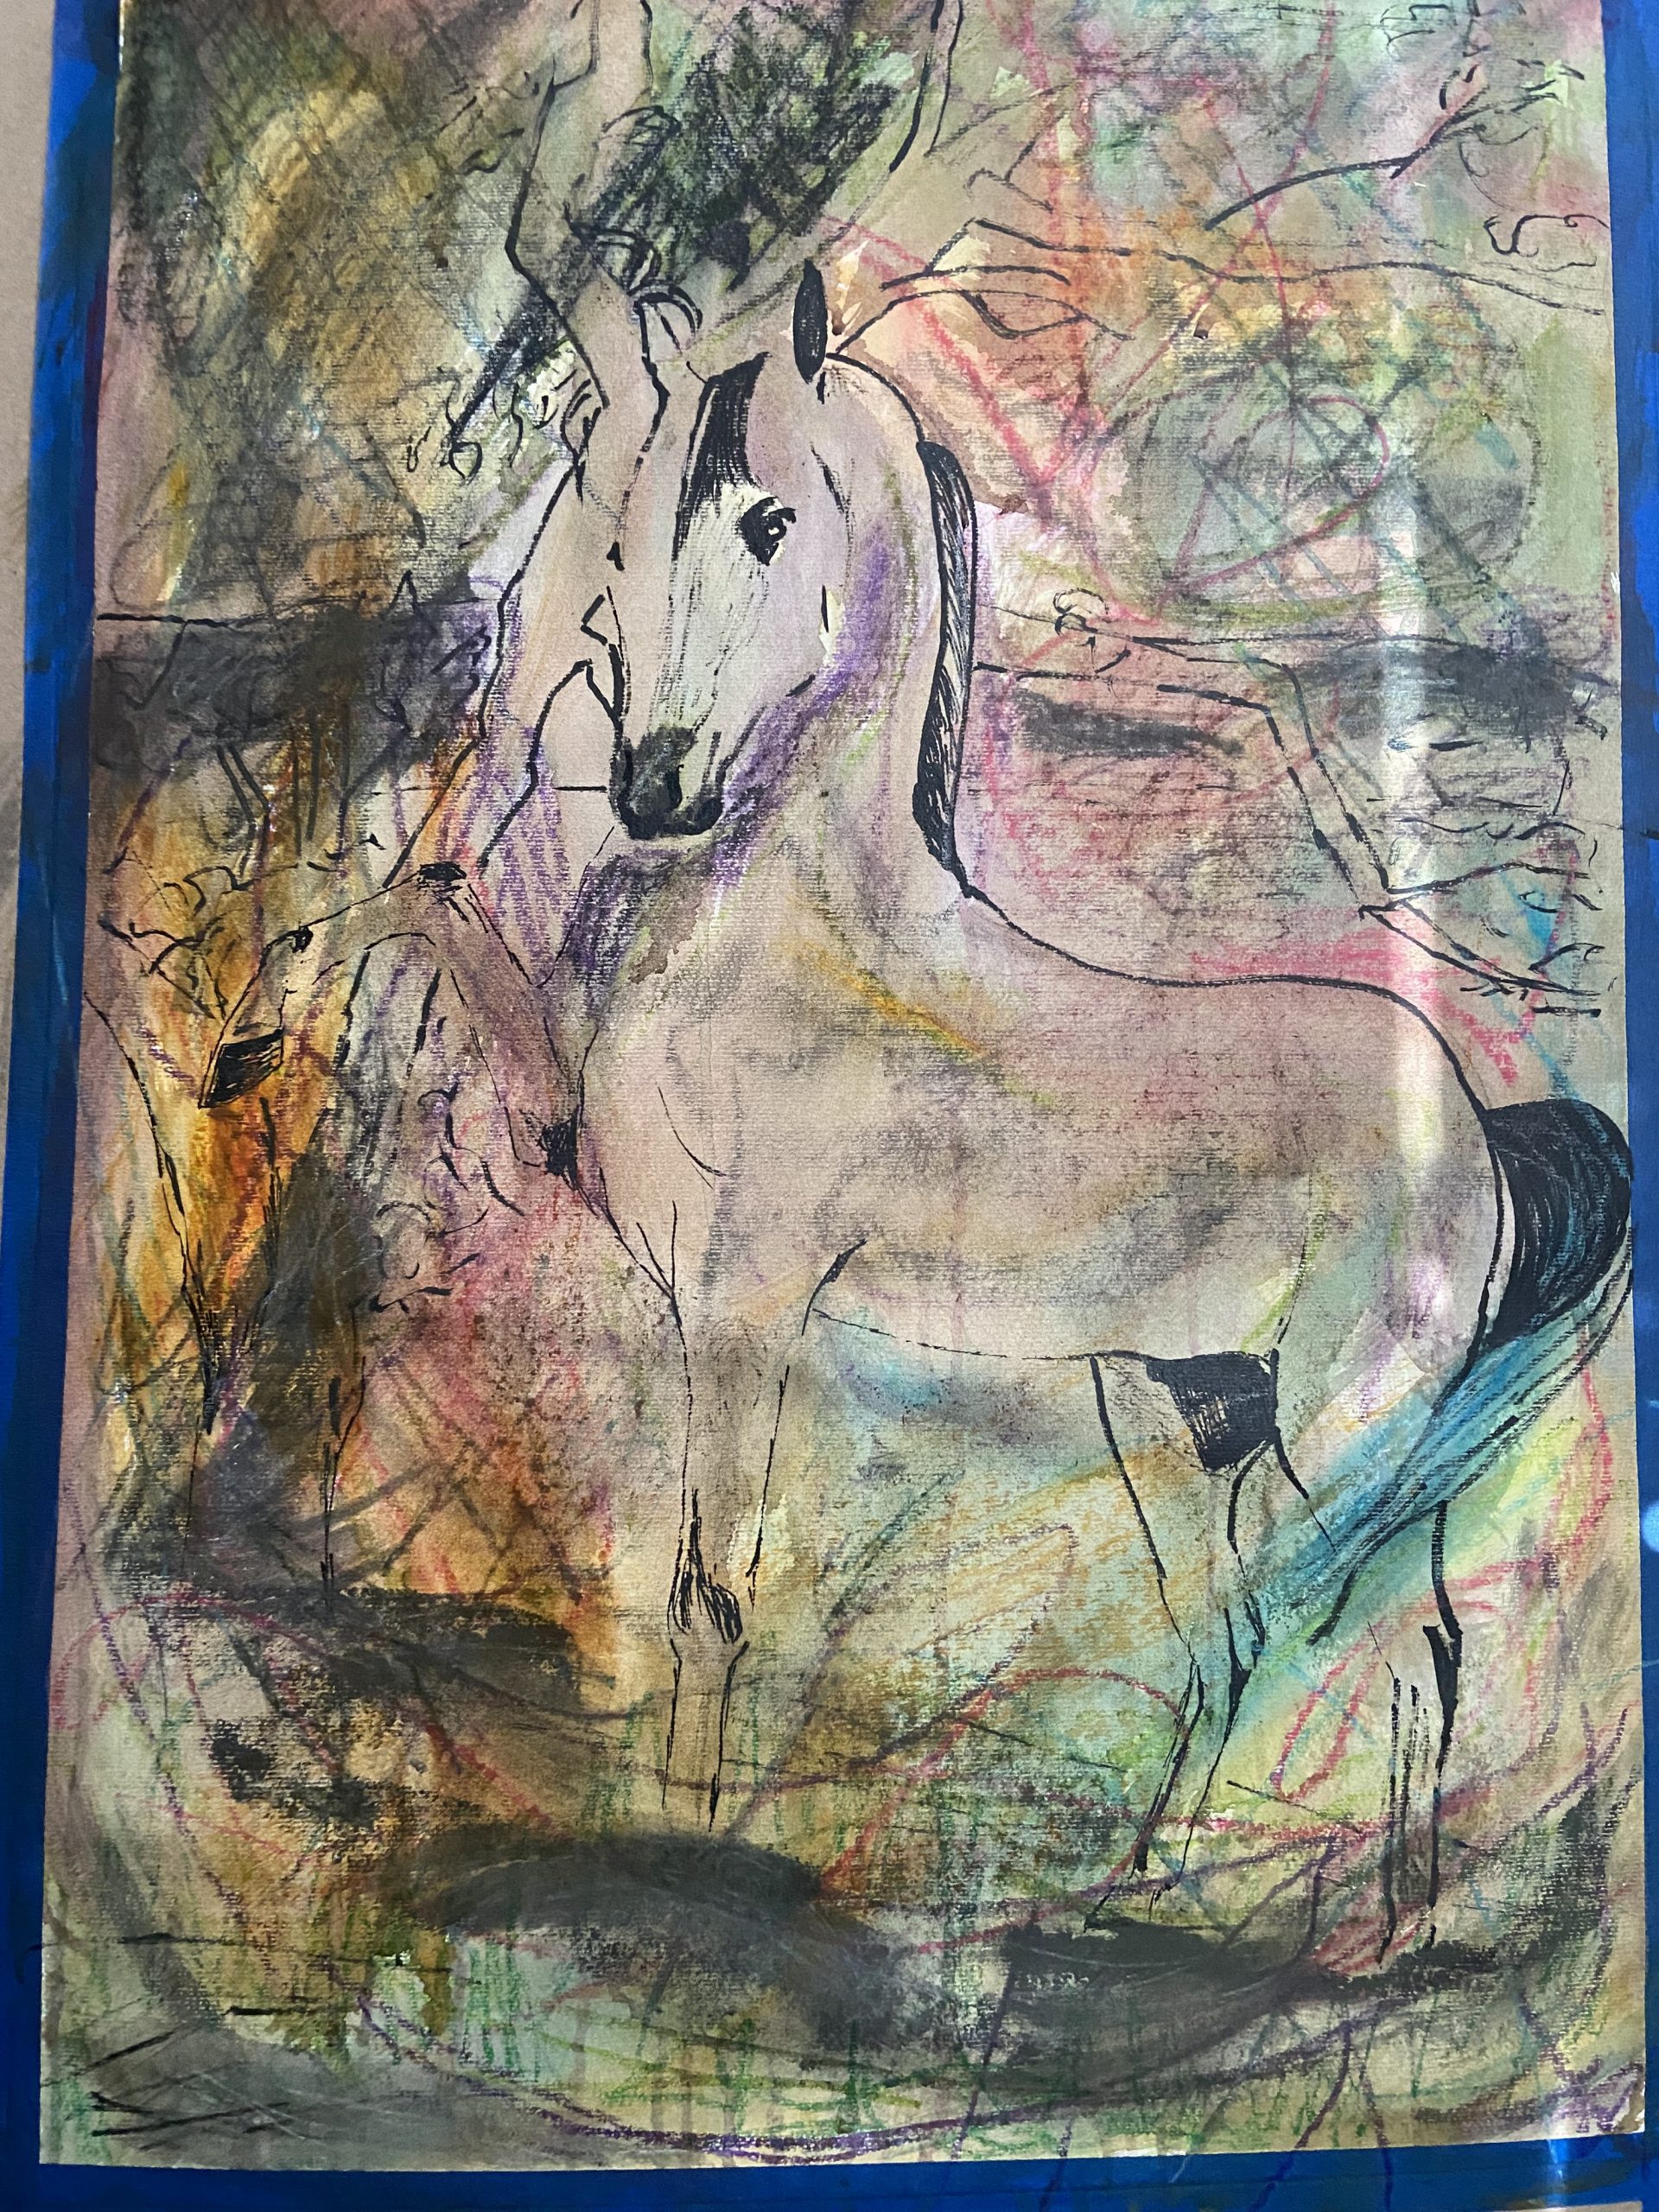 Initial Painting of a horse using various mark-making techniques and tools